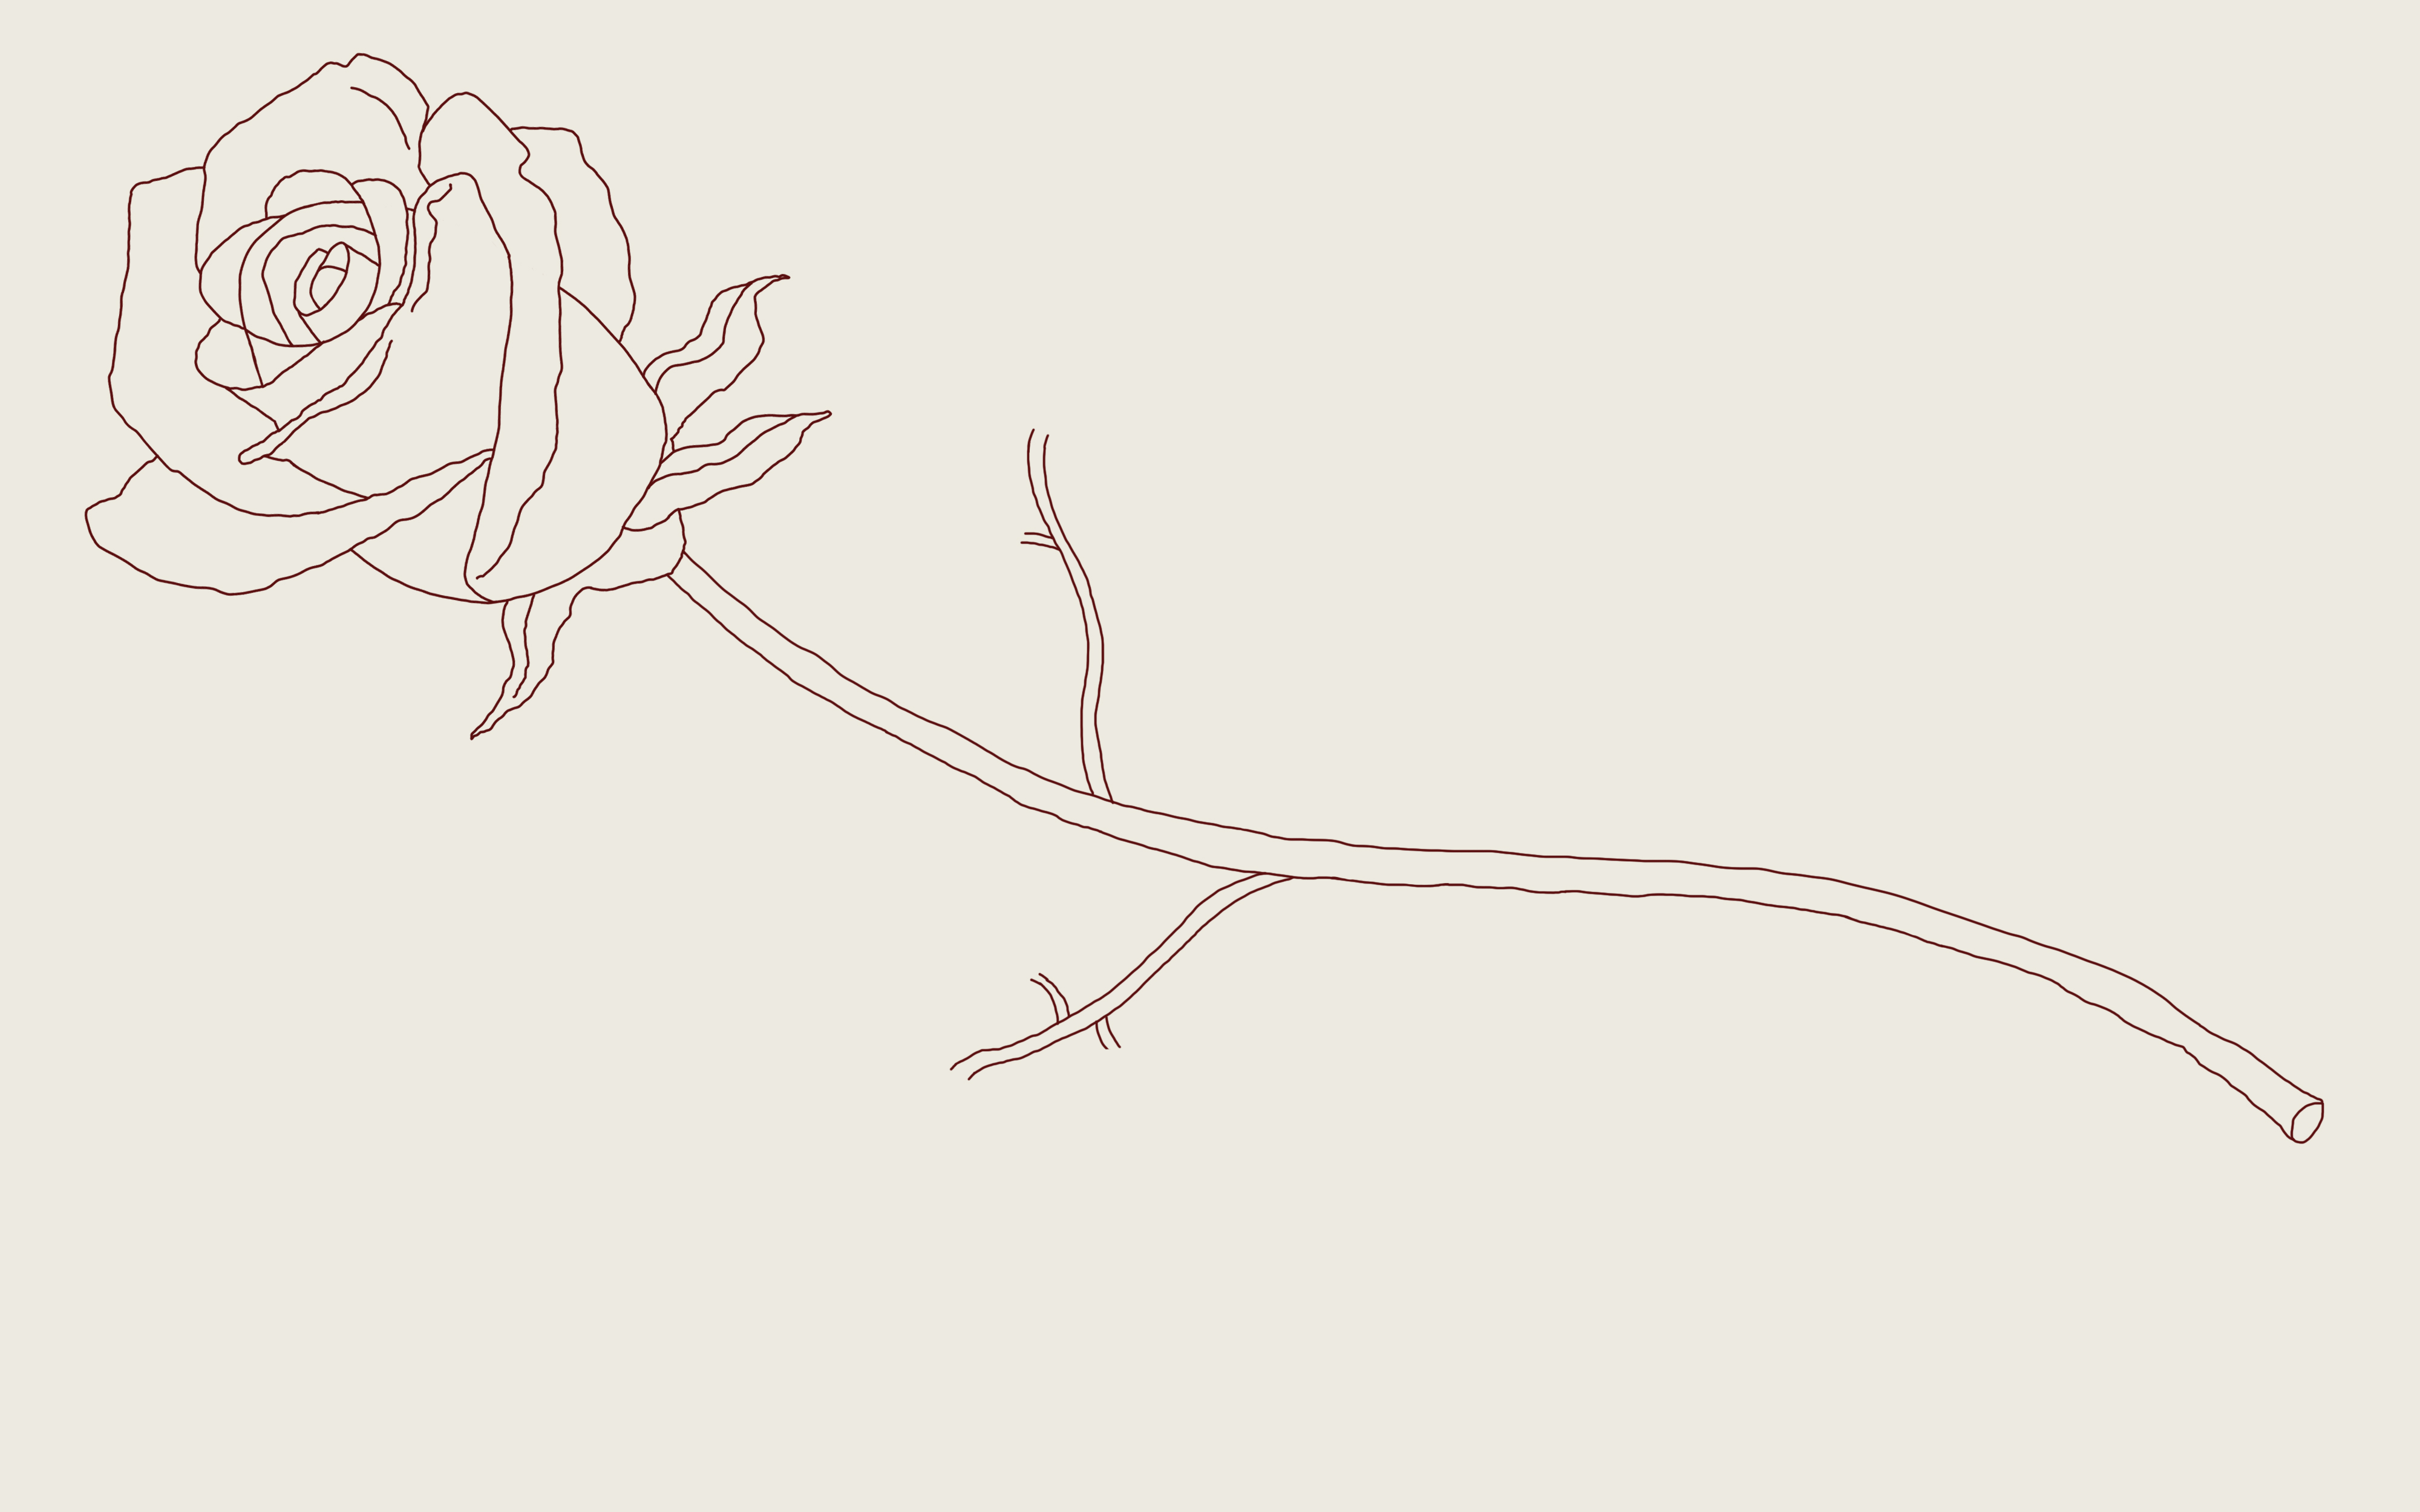 How To Draw A Rose A Step By Step Guide [2020 Updated] Thought Catalog